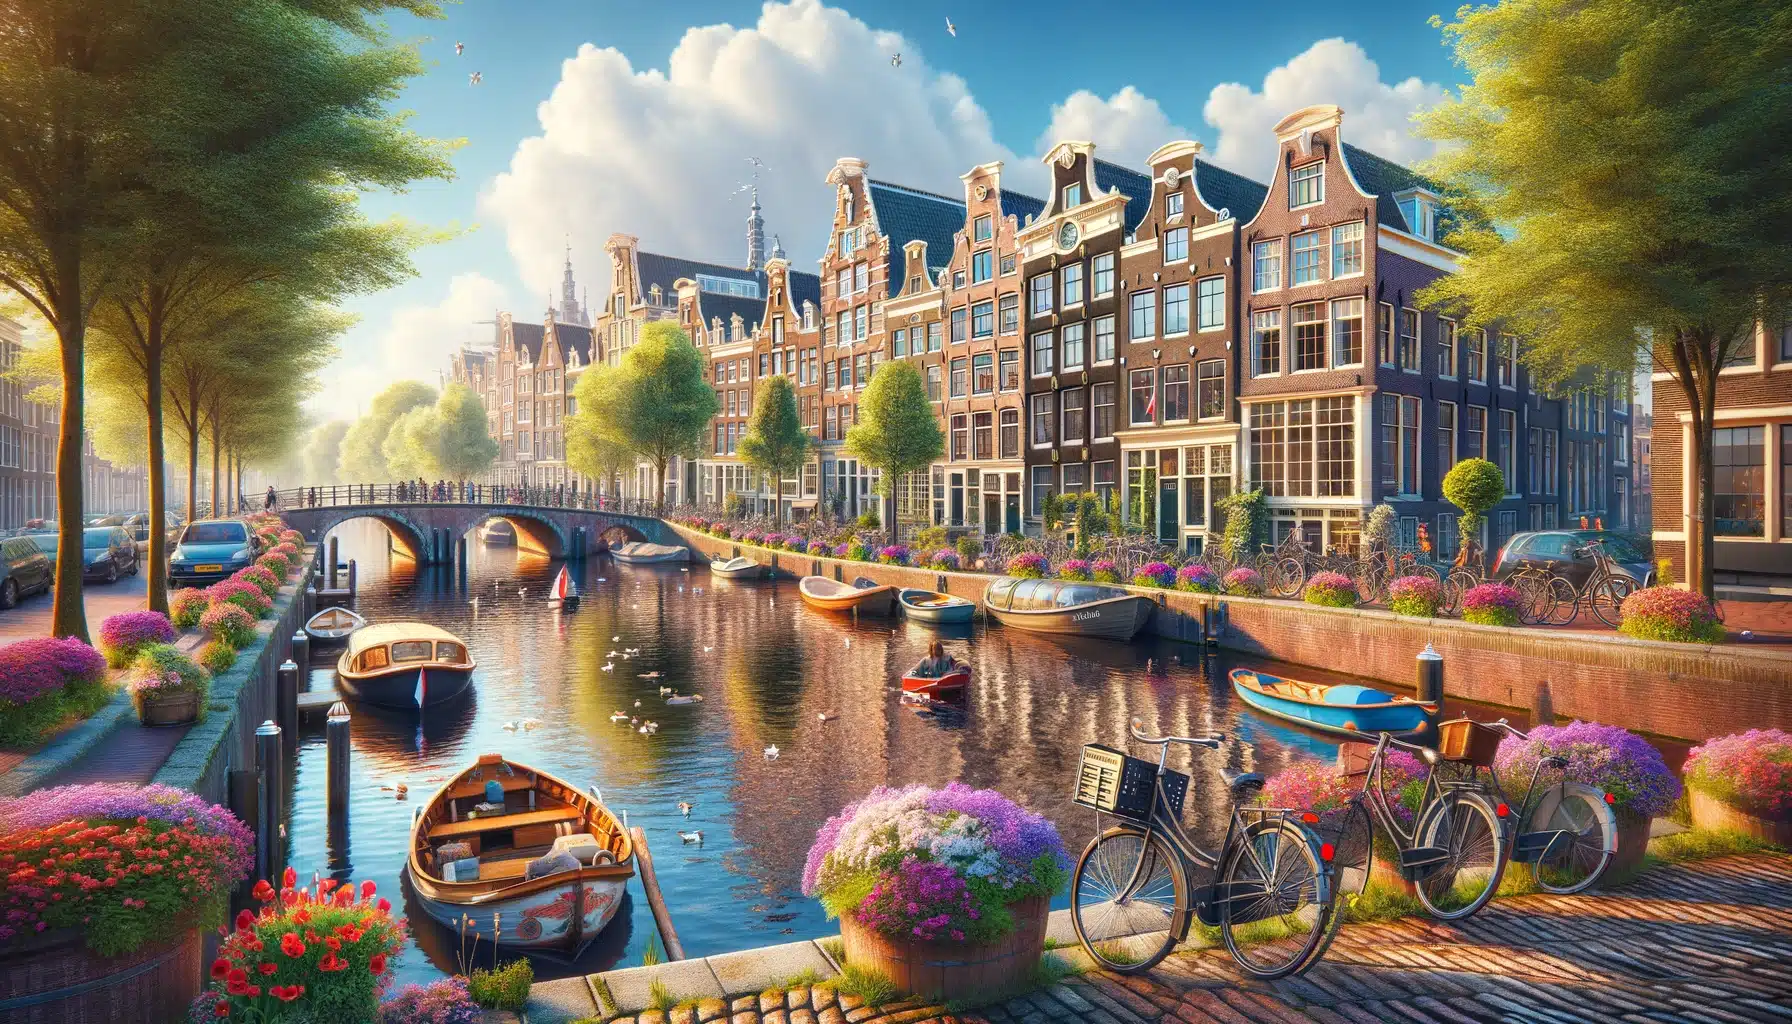 Scenic view of Amsterdam's canals with historic Dutch houses, vibrant flower beds, bicycles, and boats under a sunny sky with fluffy clouds.